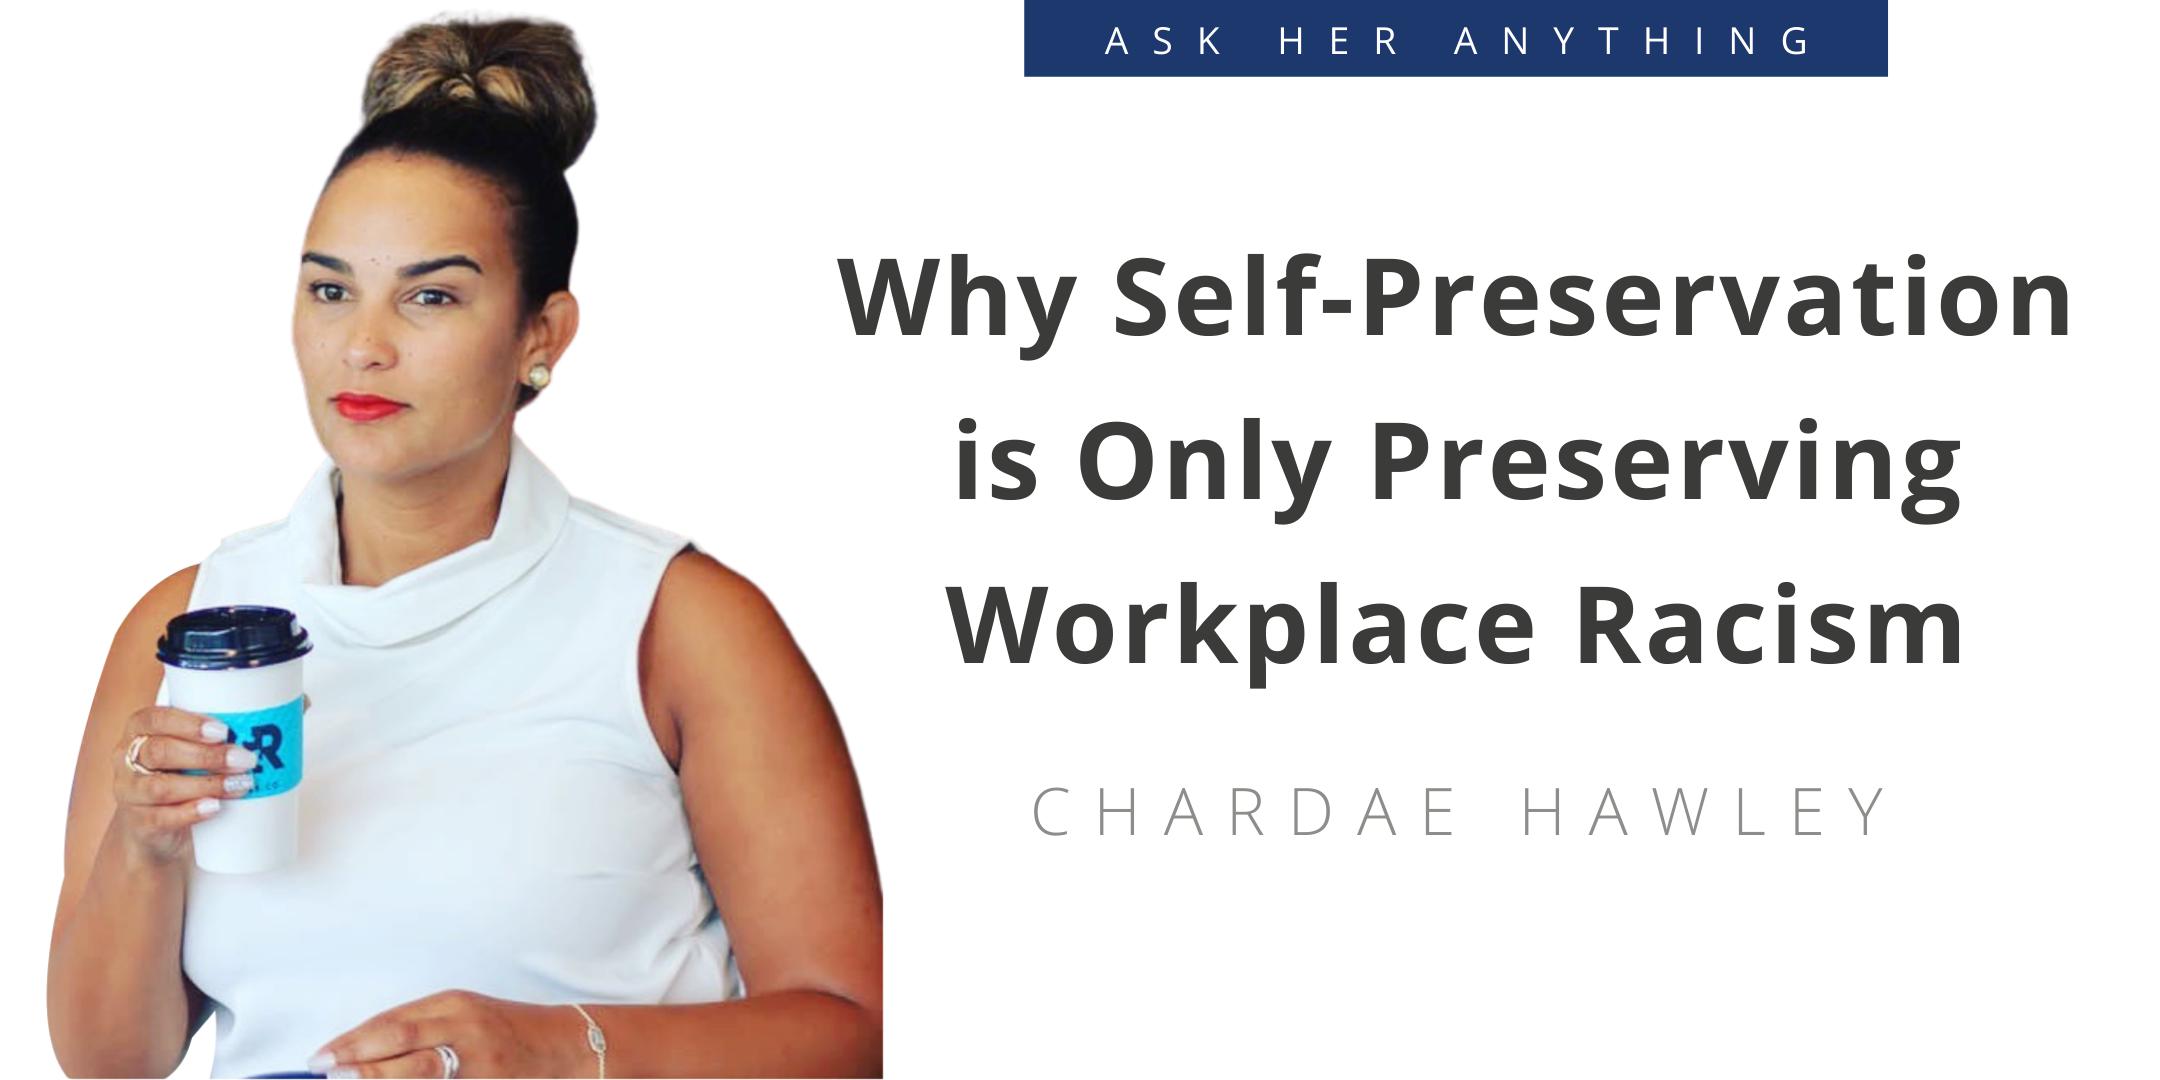 Why Self-Preservation is Only Preserving Work-Place Racism